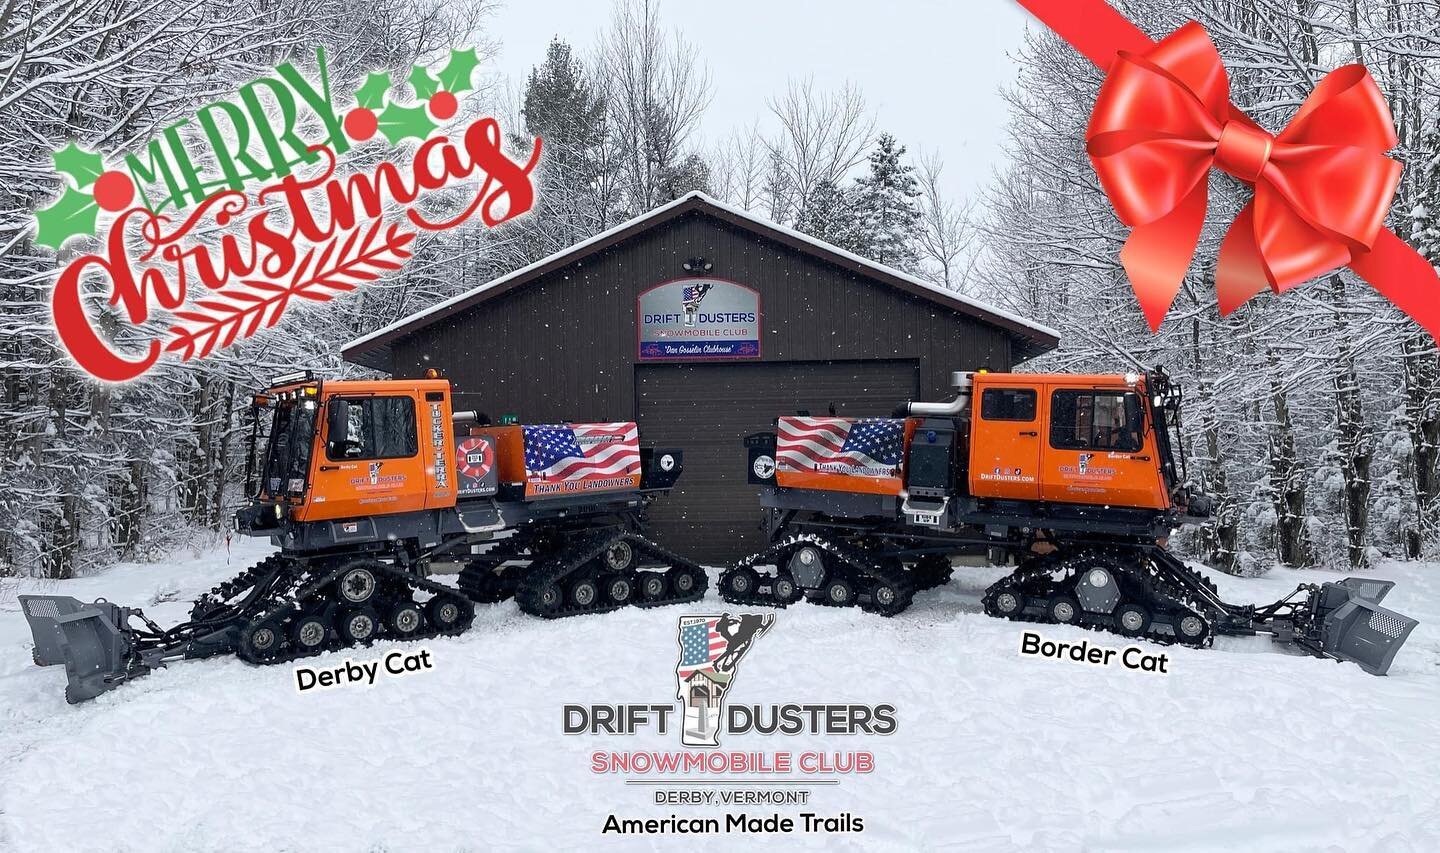 Merry Christmas from all of us at Drift Dusters Snowmobile Club to:

-Our landowners who graciously let us use their land every year. 
-Our volunteers who spend many hours meeting, painting, staking, signing, grooming, shoveling, cleaning, constructi